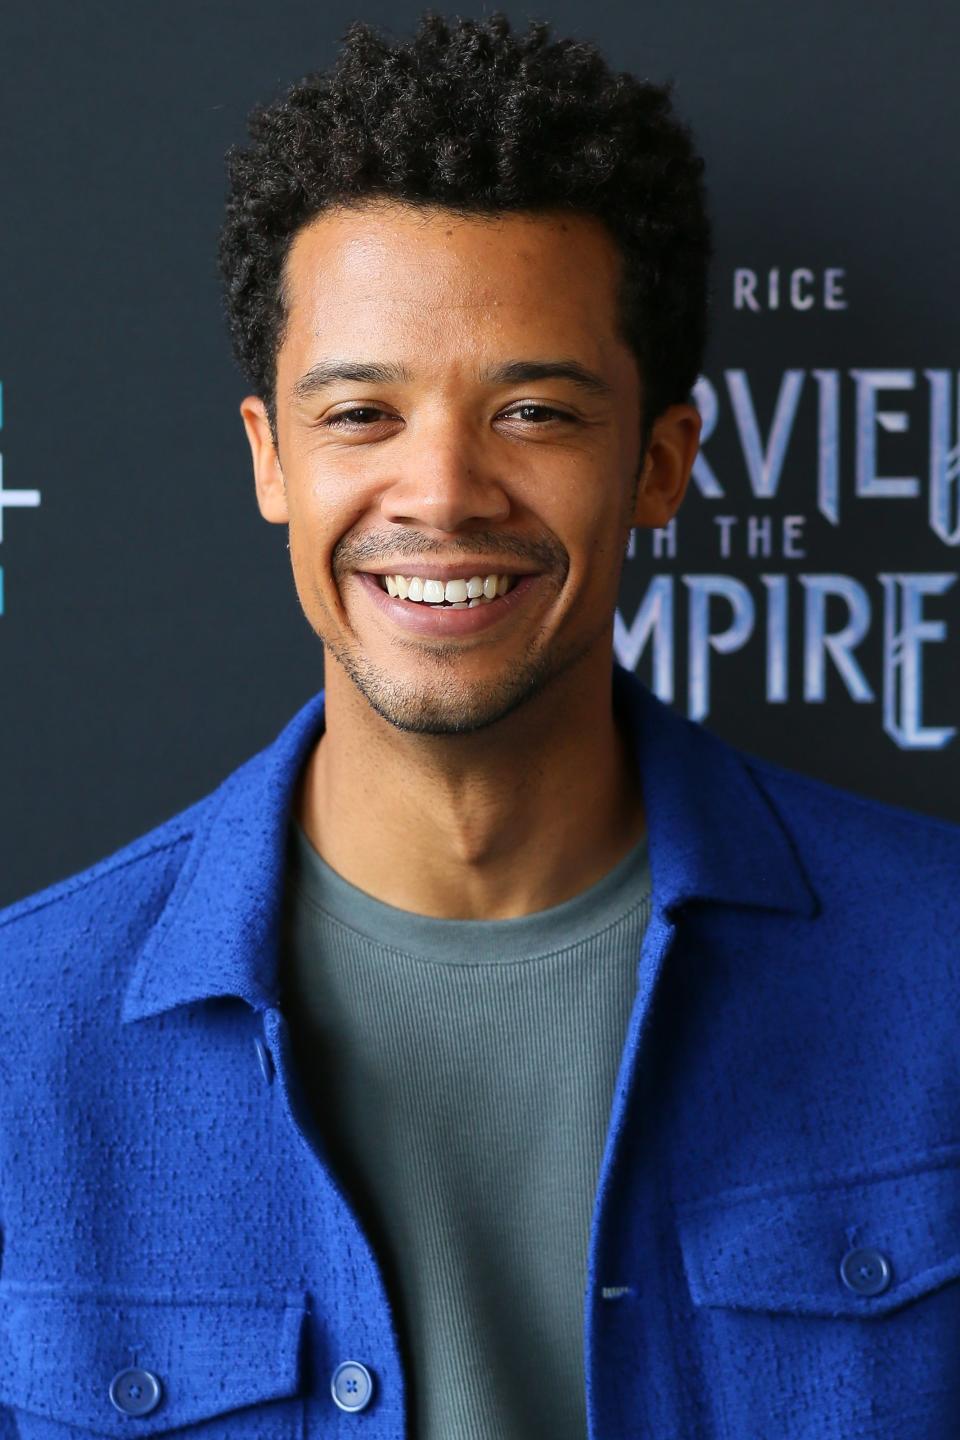 Jacob in a blue jacket smiling at a promotional event